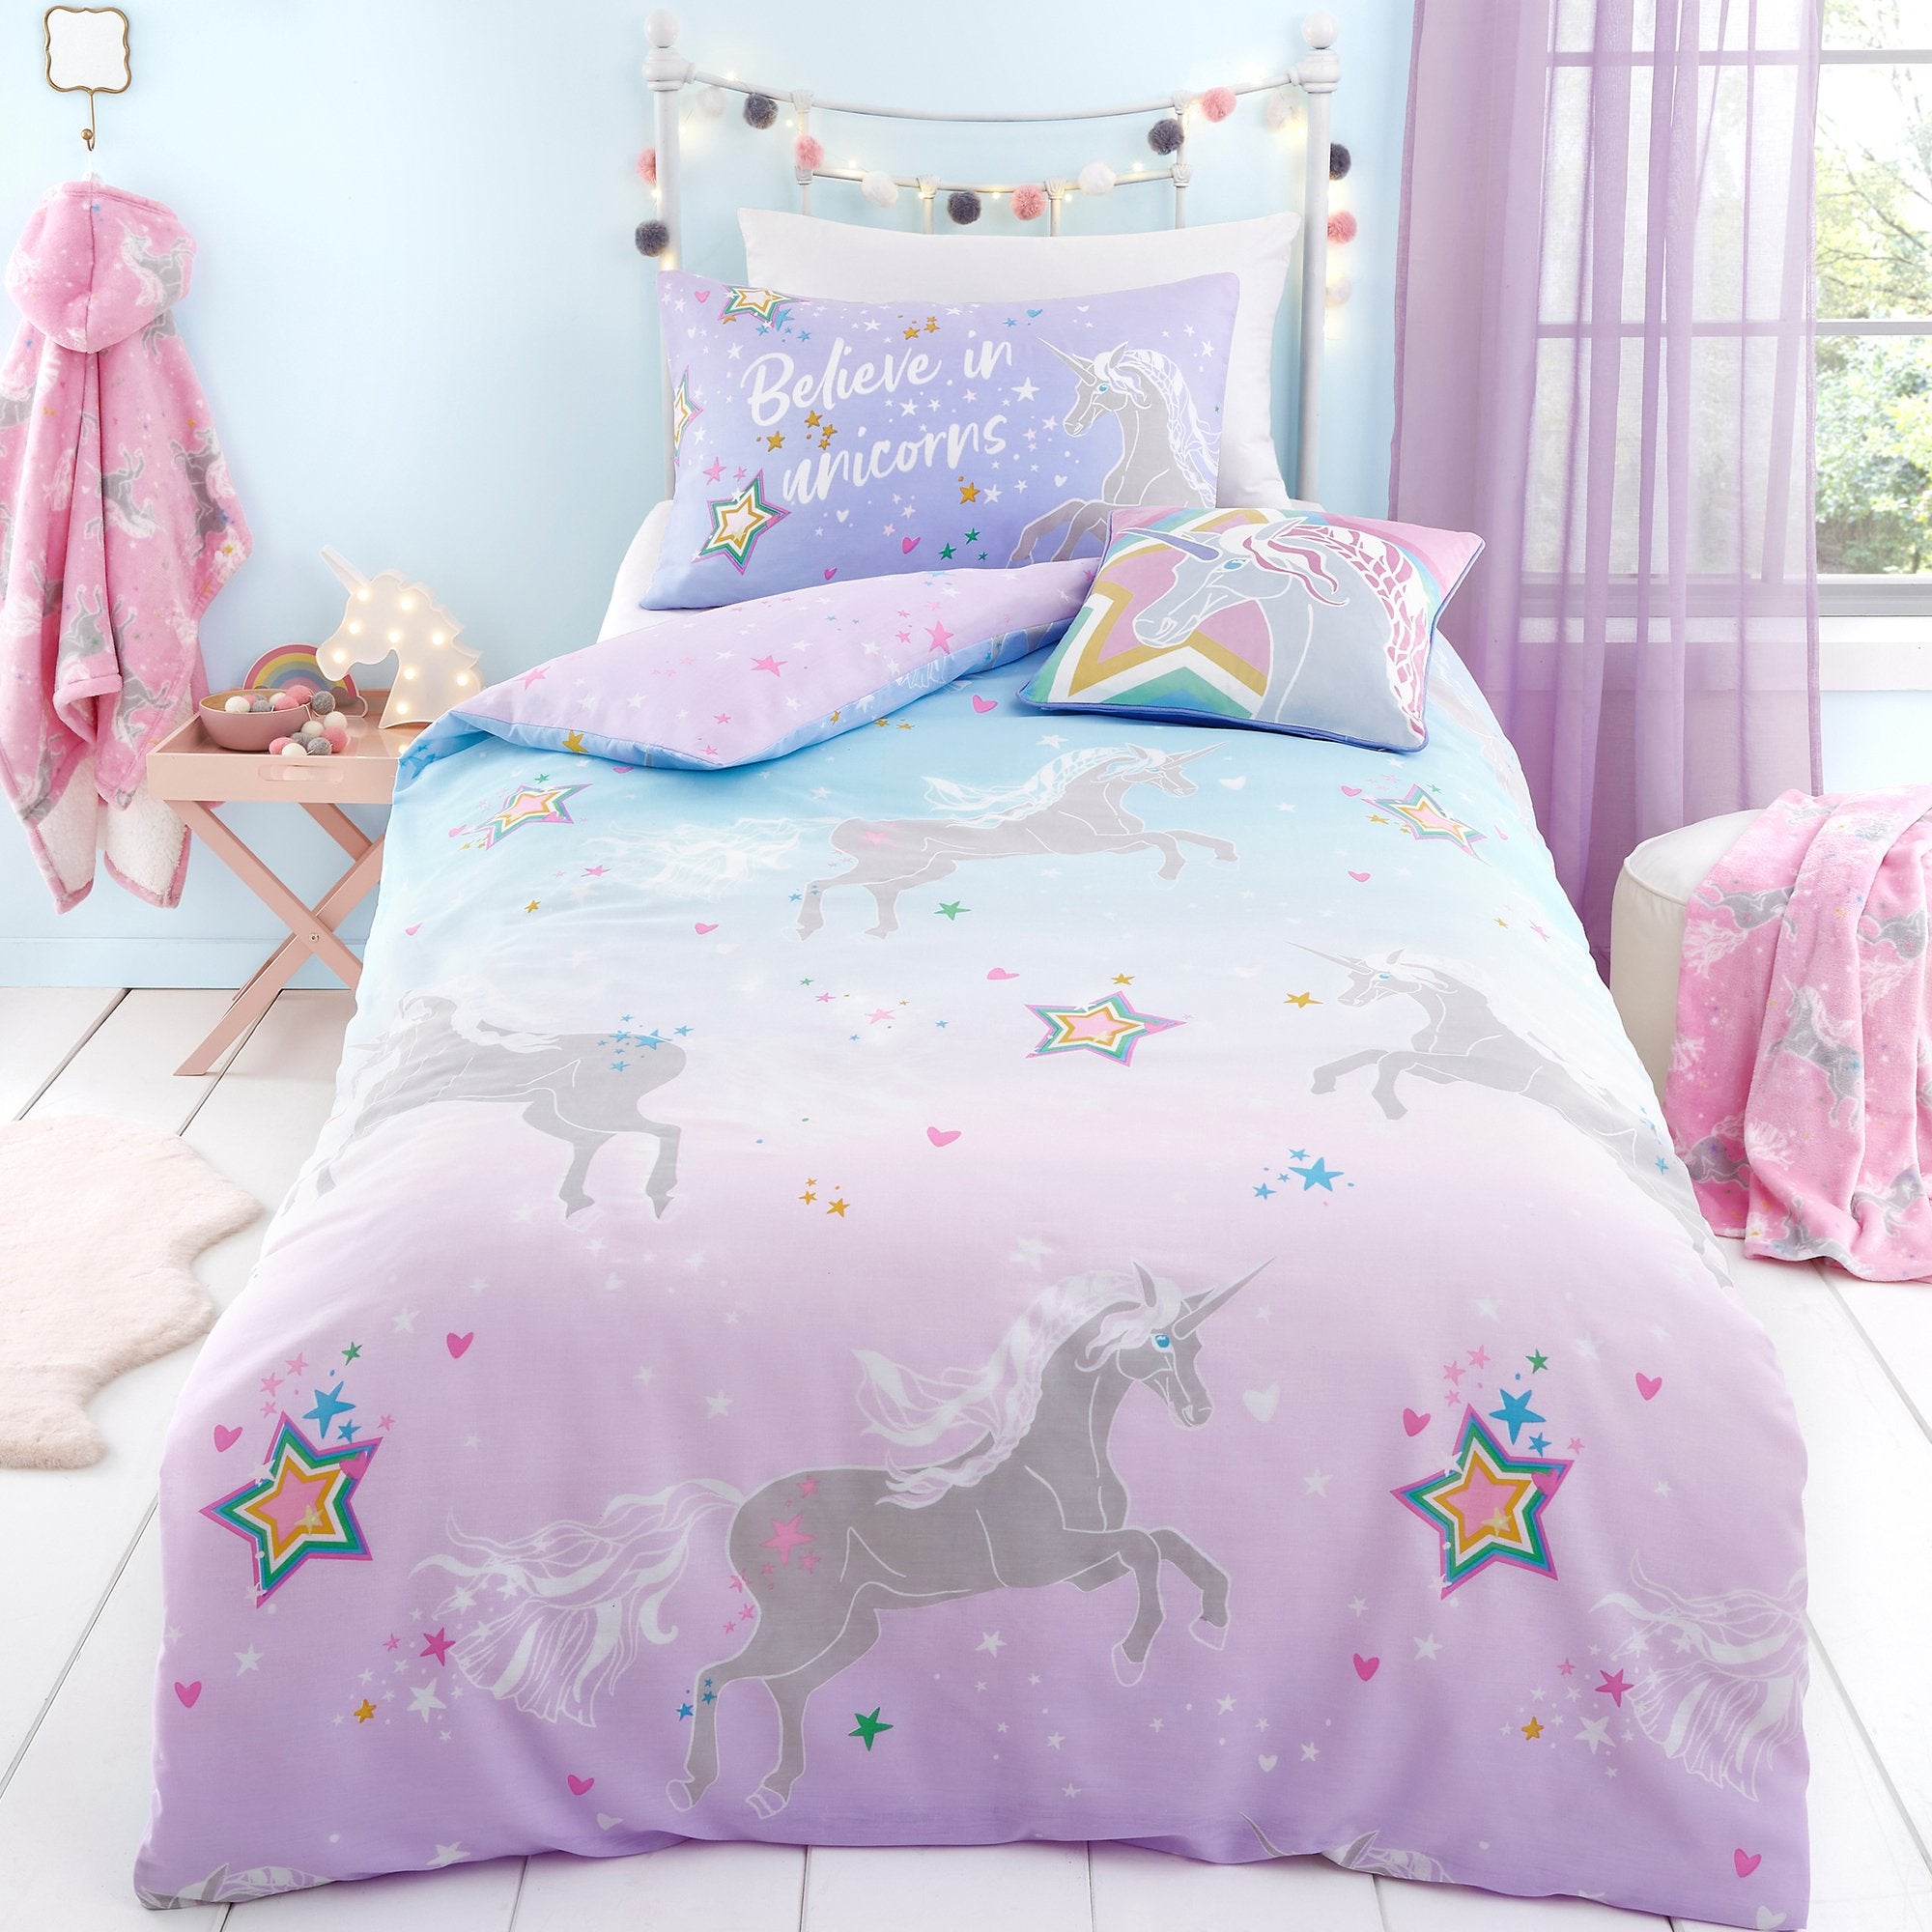 Duvet Cover Set Ombre Unicorn by Bedlam in Lilac